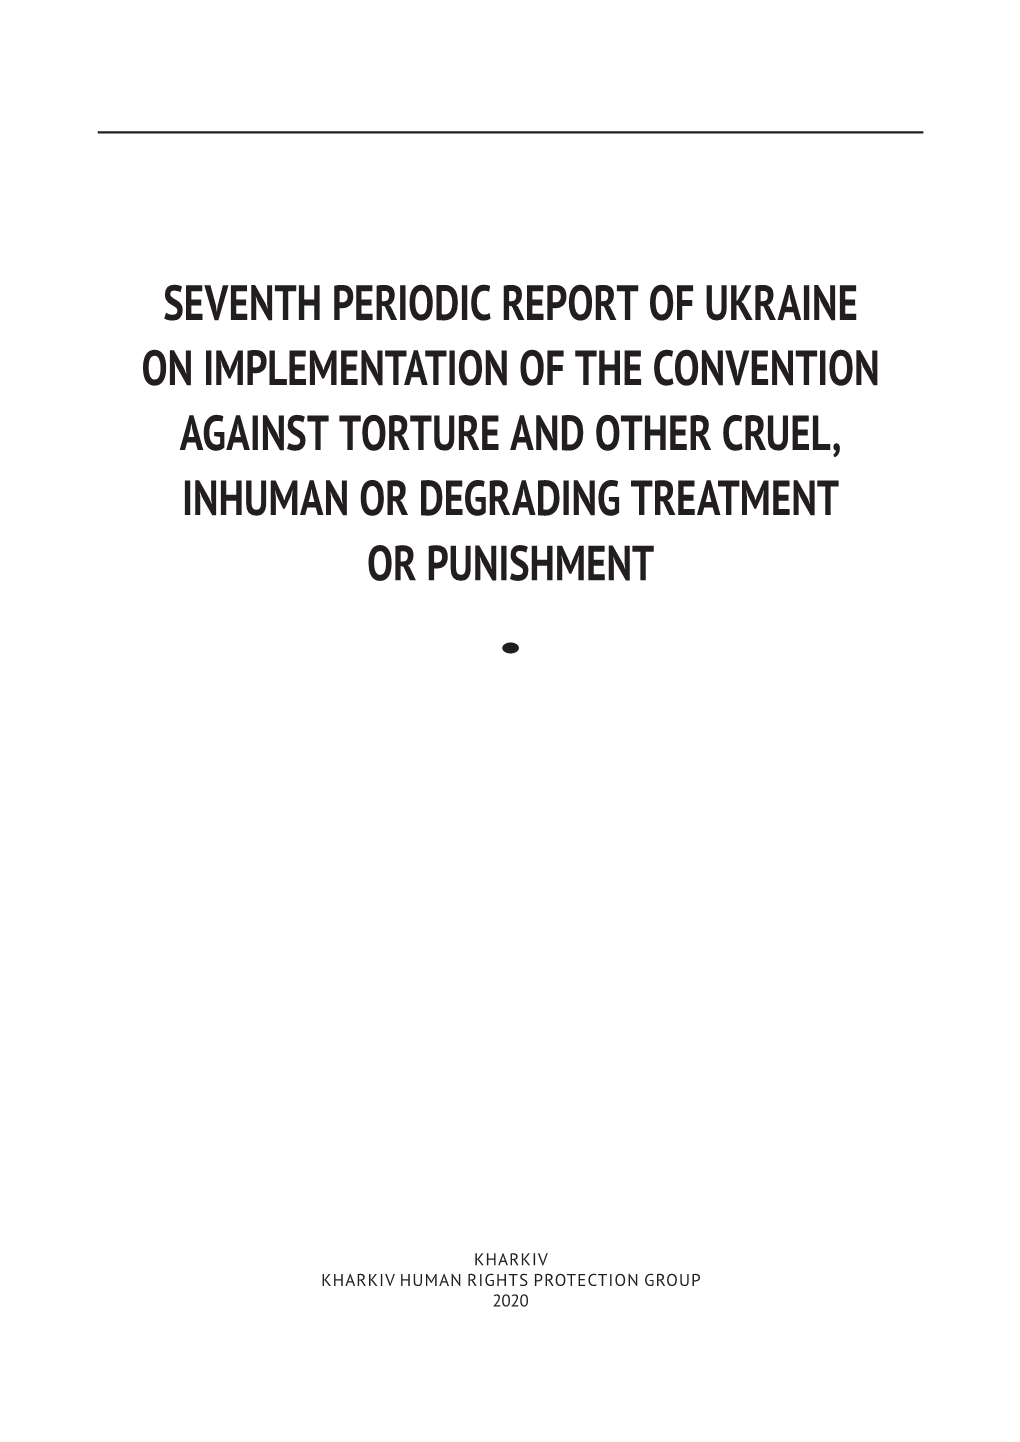 Seventh Periodic Report of Ukraine on Implementation of the Convention Against Torture and Other Cruel, Inhuman Or Degrading Treatment Or Punishment